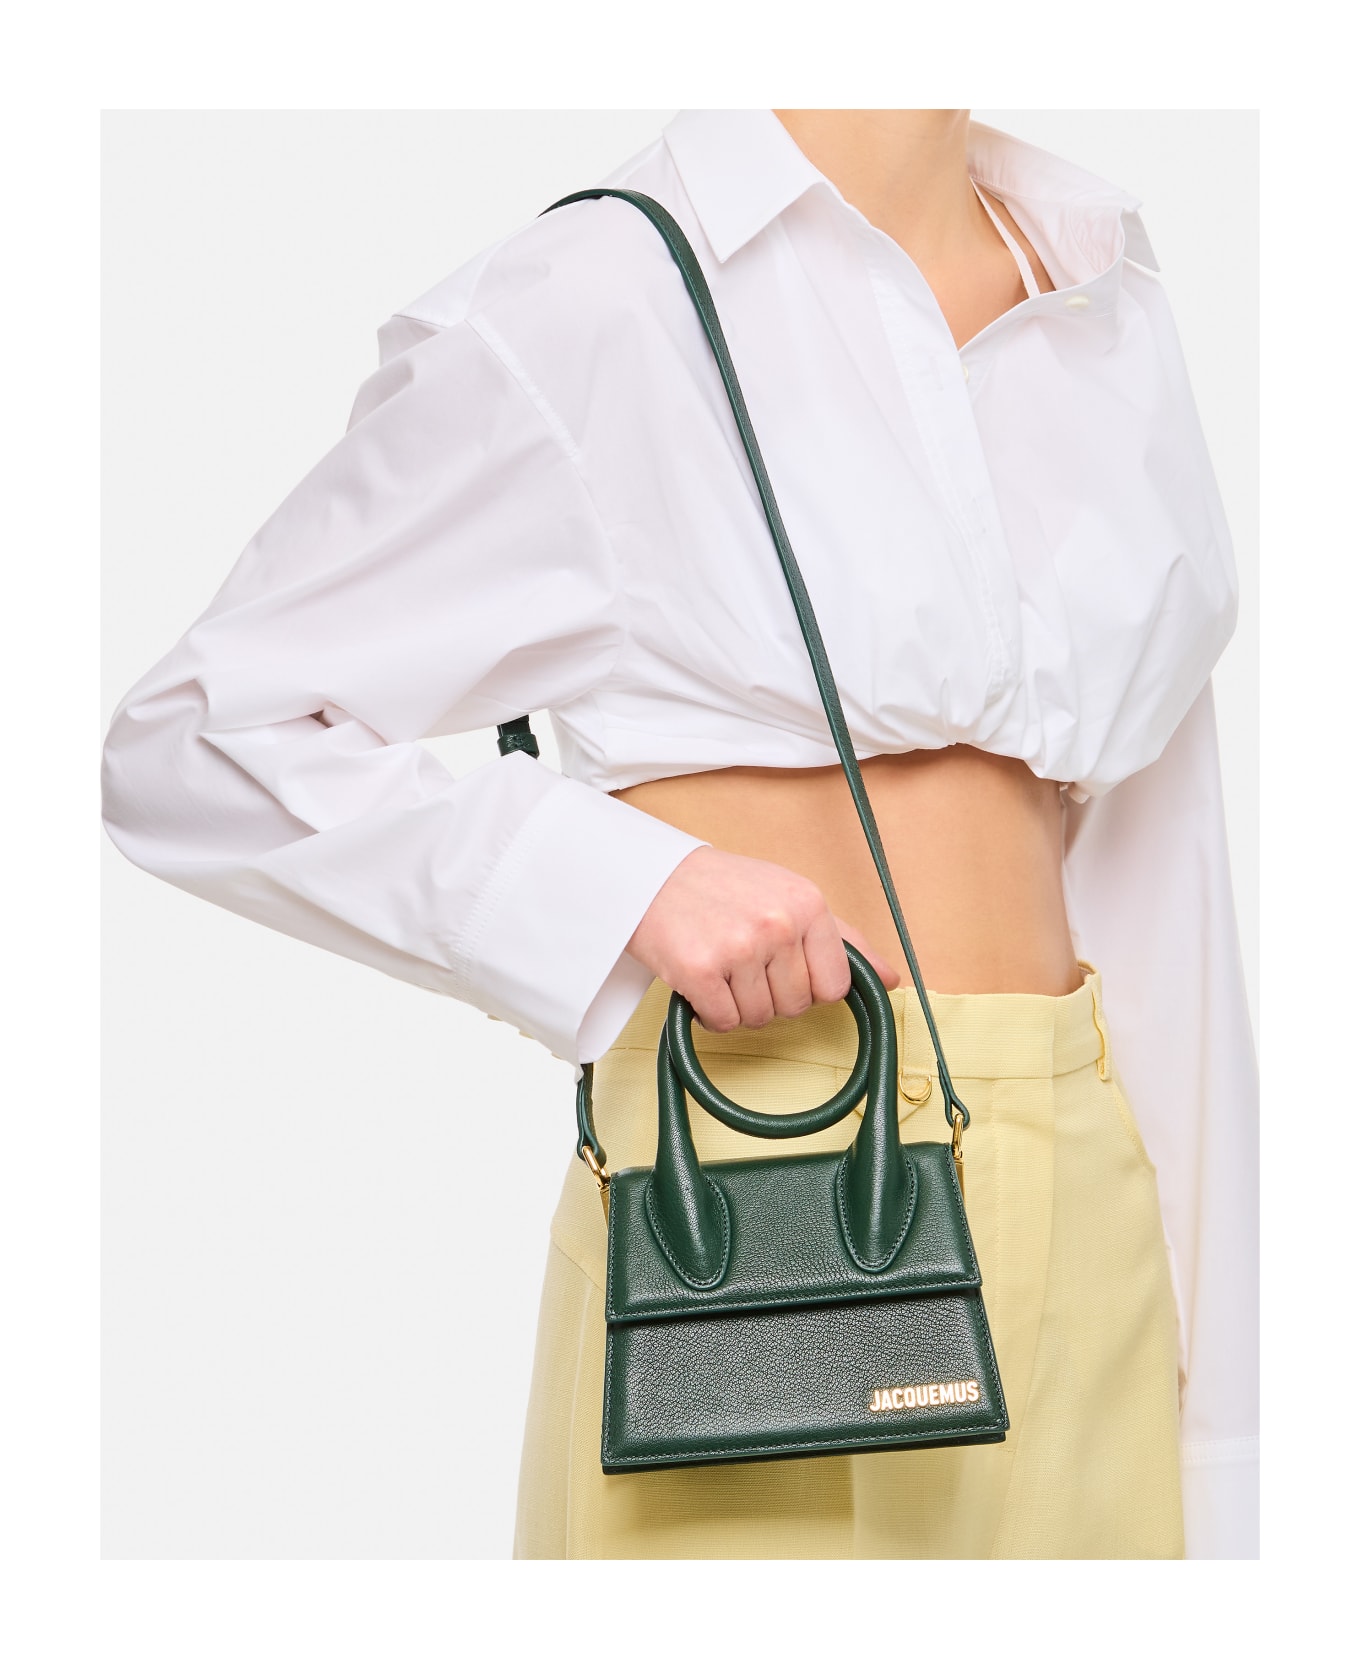 Jacquemus Le Chiquito Noeud Leather Shoulder Bag - Green